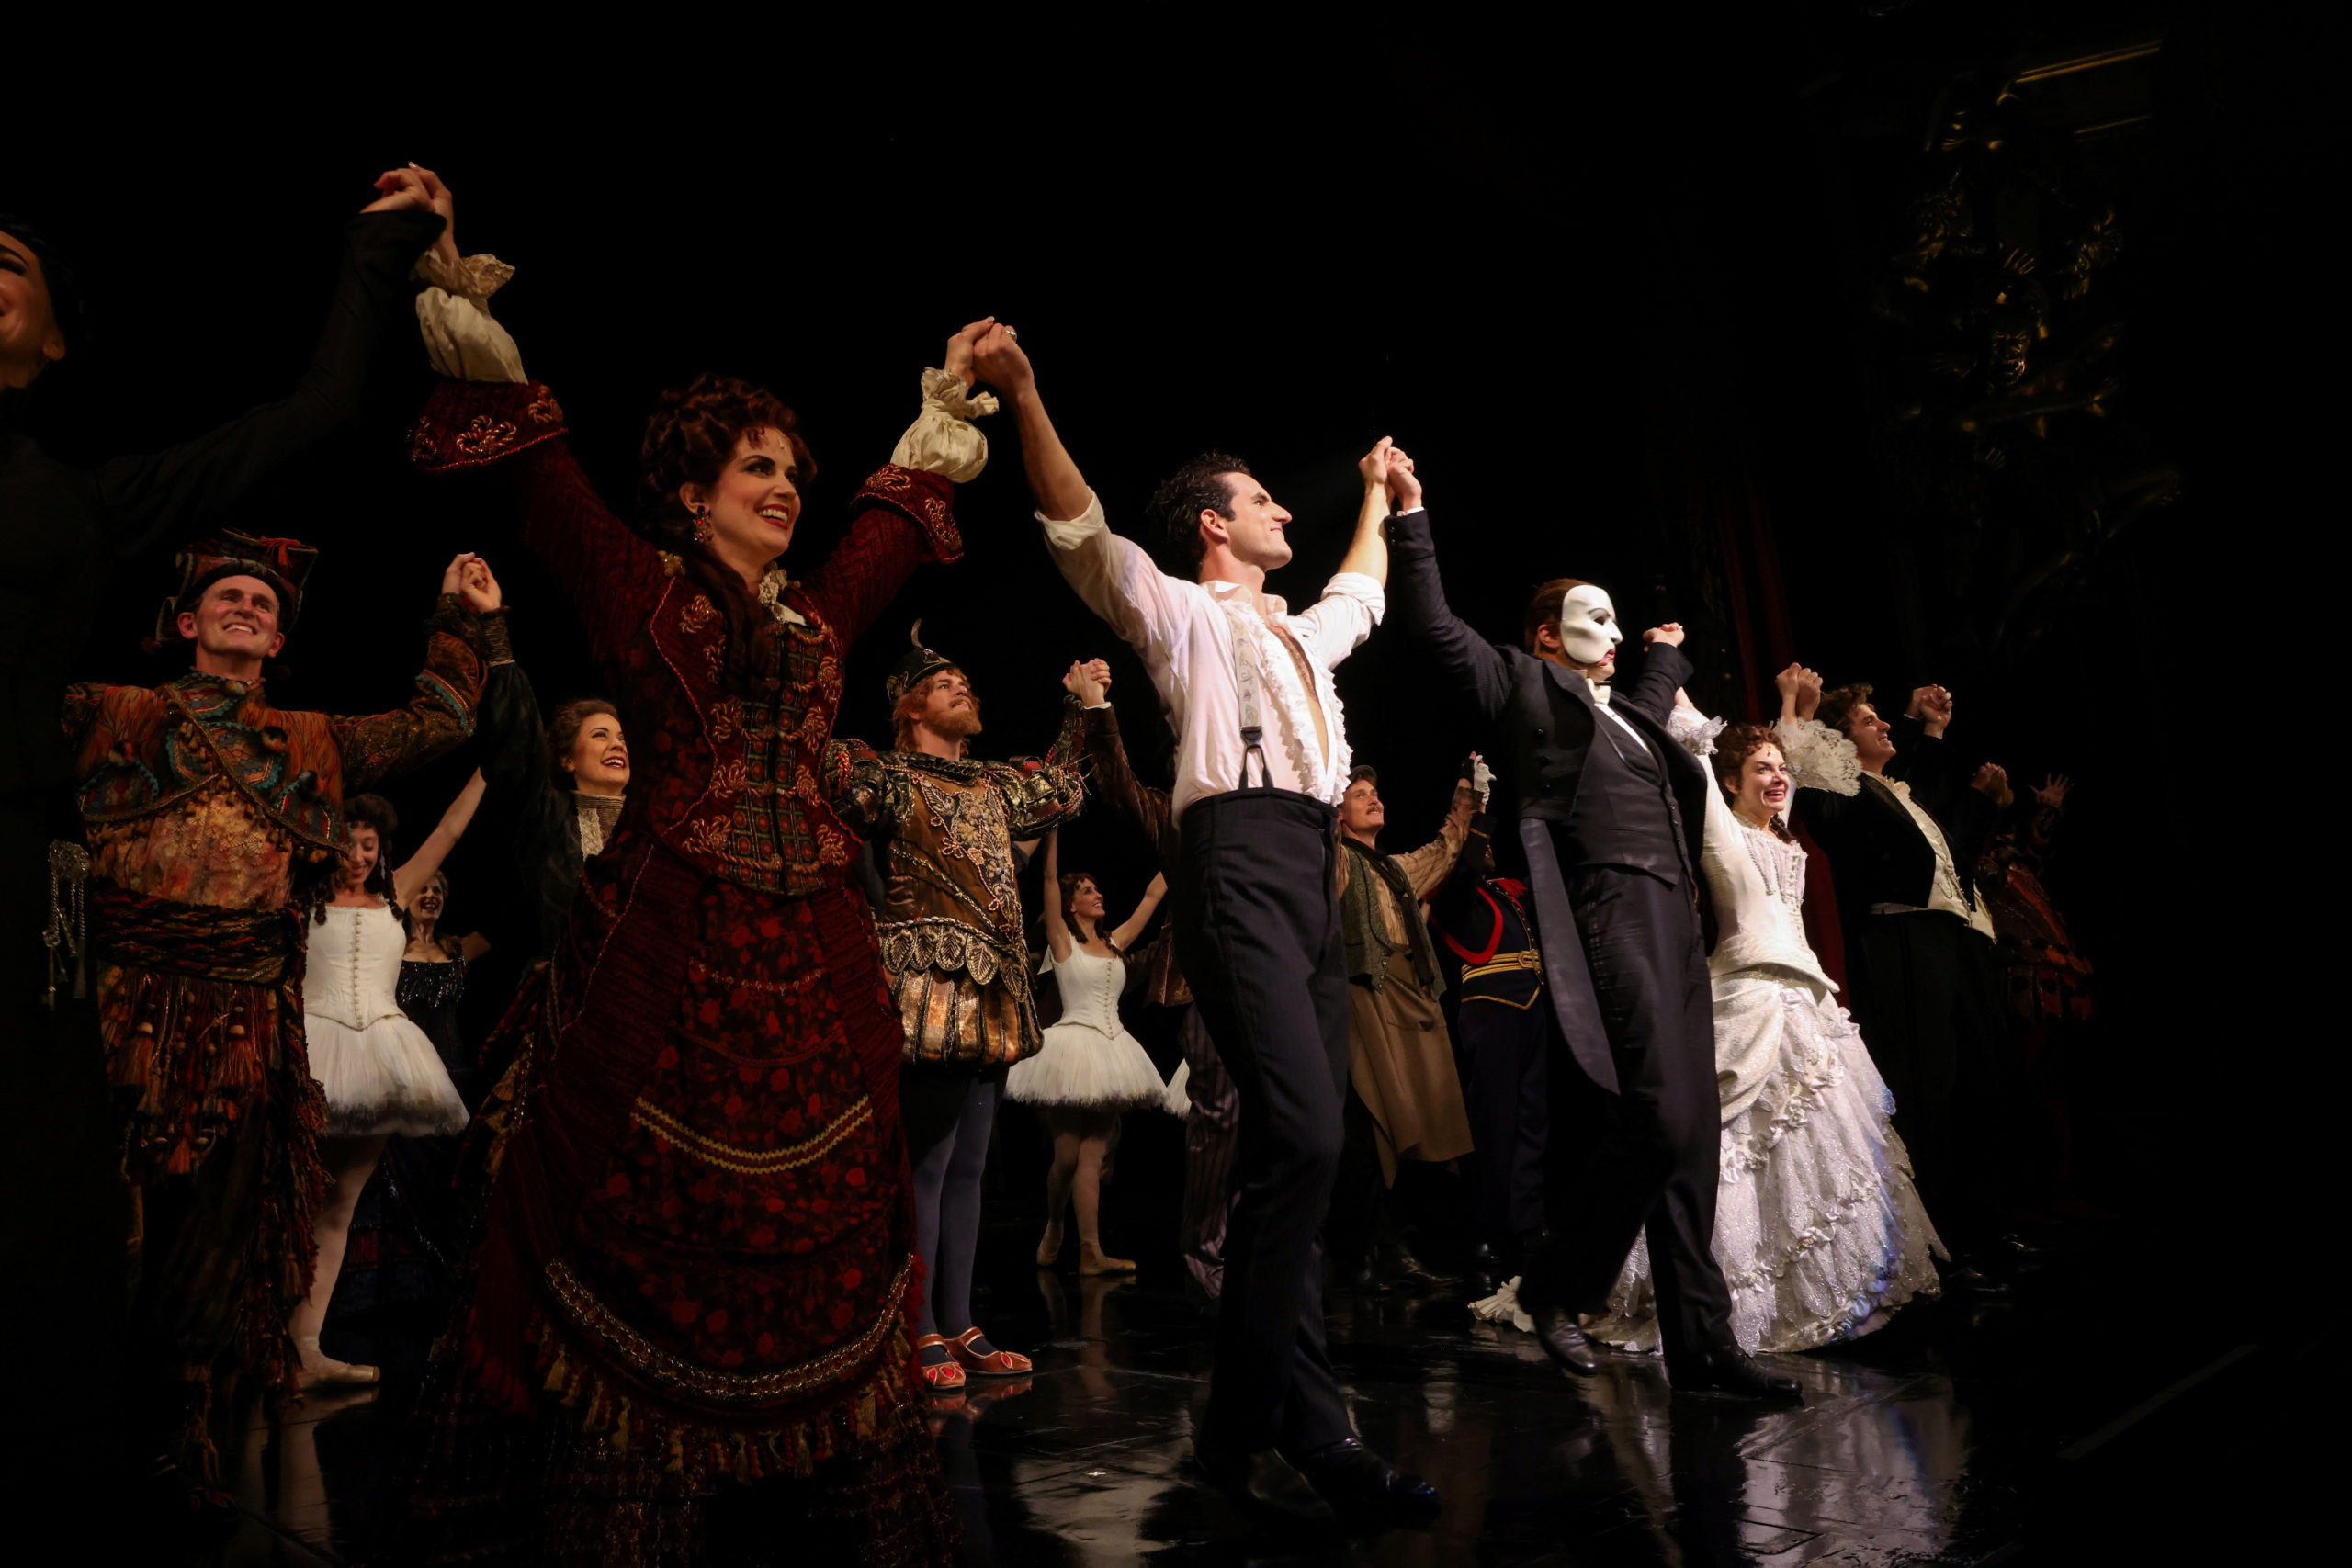 Cast members stand on the stage after performing on the re-opening night of "Phantom of the Opera" at the Majestic Theater in New York City, New York, U.S., October 22, 2021. Picture taken October 22, 2021. REUTERS/Caitlin Ochs